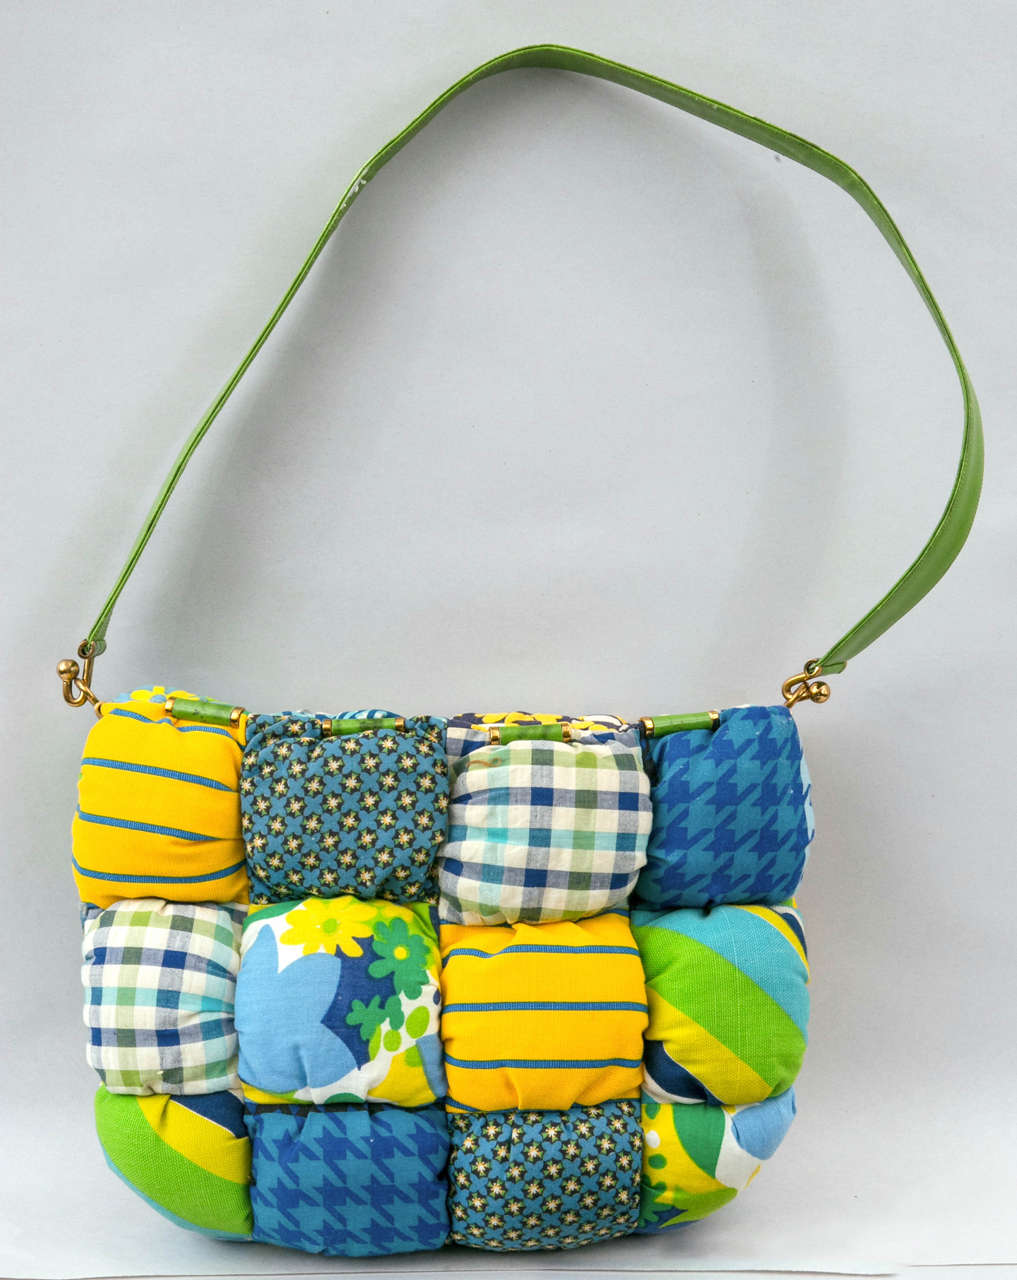 Presented by Funky Finders, limited Judith Leiber textile shoulder bag featuring distinctive flower power prints on a statement quilted surround. Green leather cylinder accents frame the top of purse and compliment the matching color leather strap.